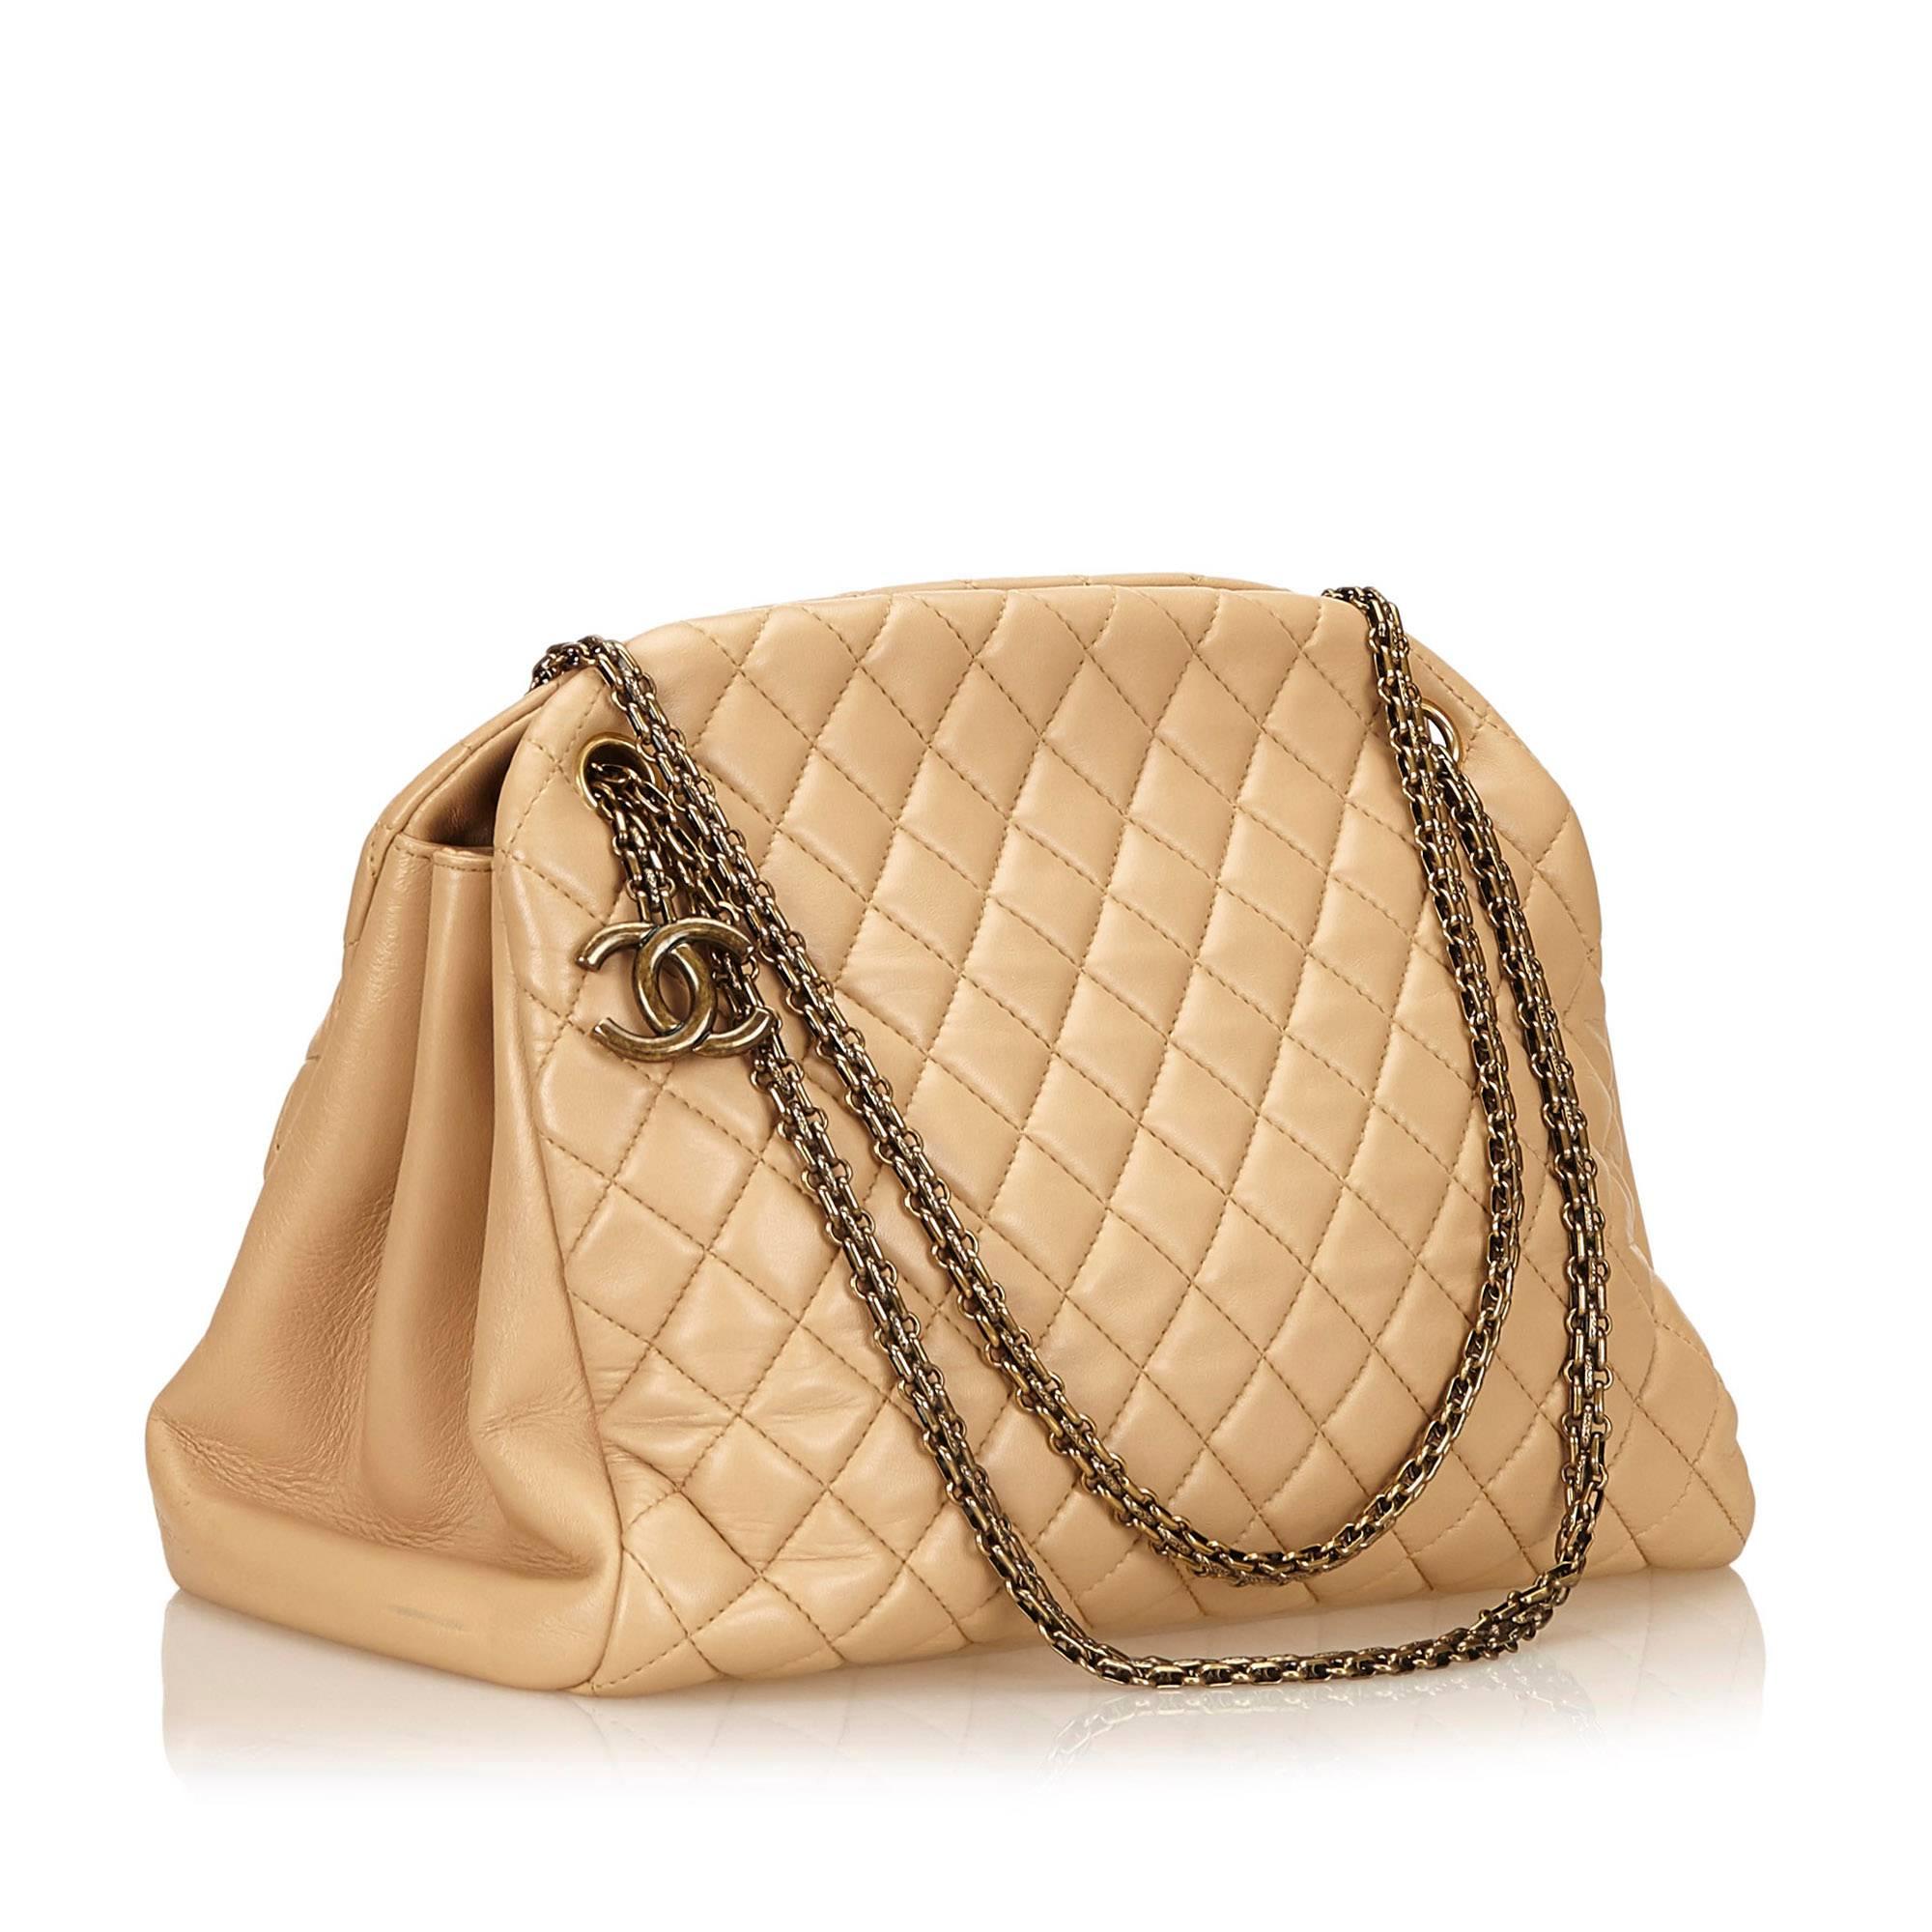 Product details:  Beige quilted leather Mademoiselle bowling bag by Chanel.  Dual chain shoulder straps.  Three main compartments- two open and center zip.  Lined interior with inner slide pockets and key fob.  Protective metal feet.  Antiqued